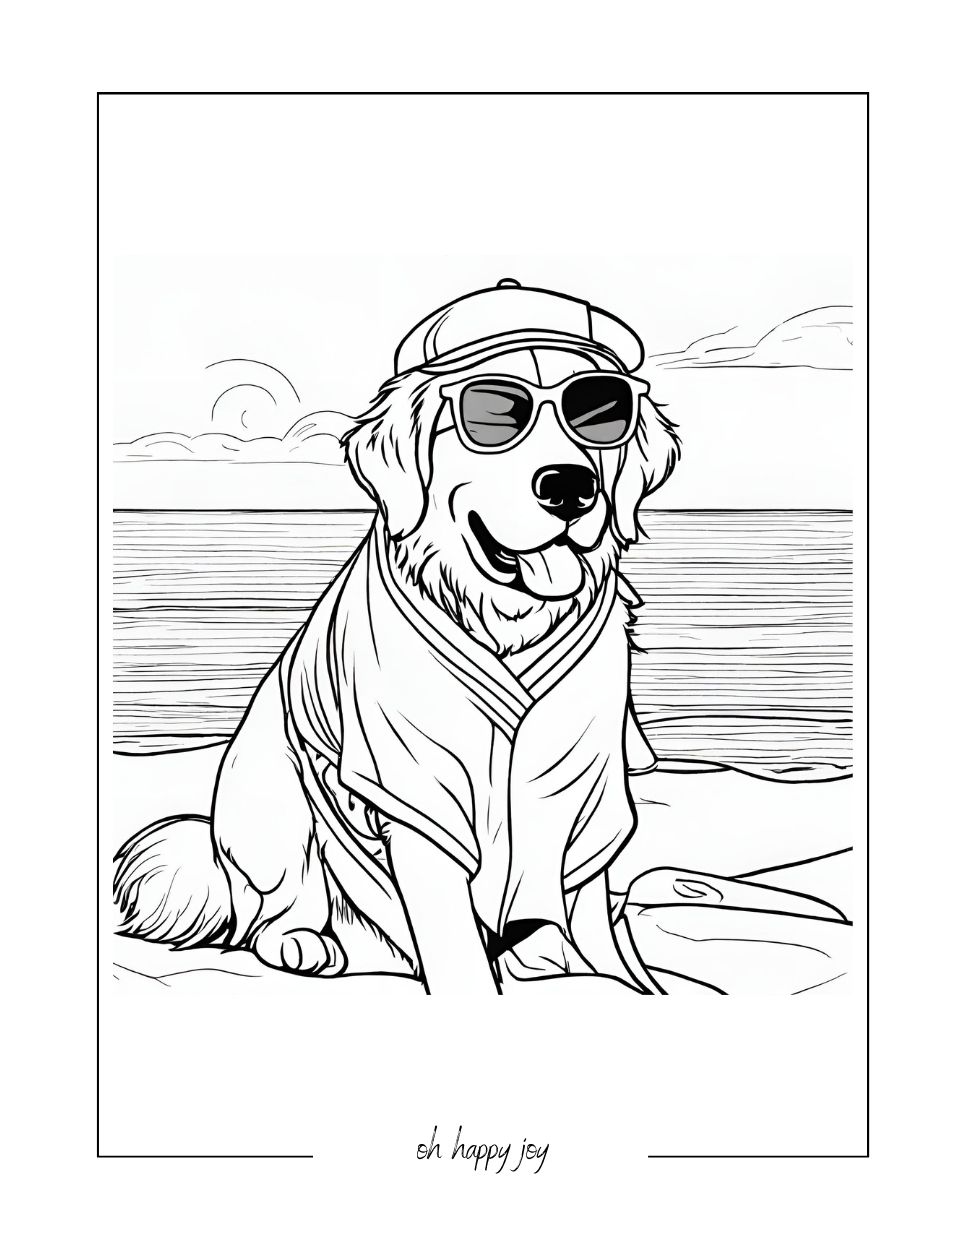 golden retriever beach day coloring page